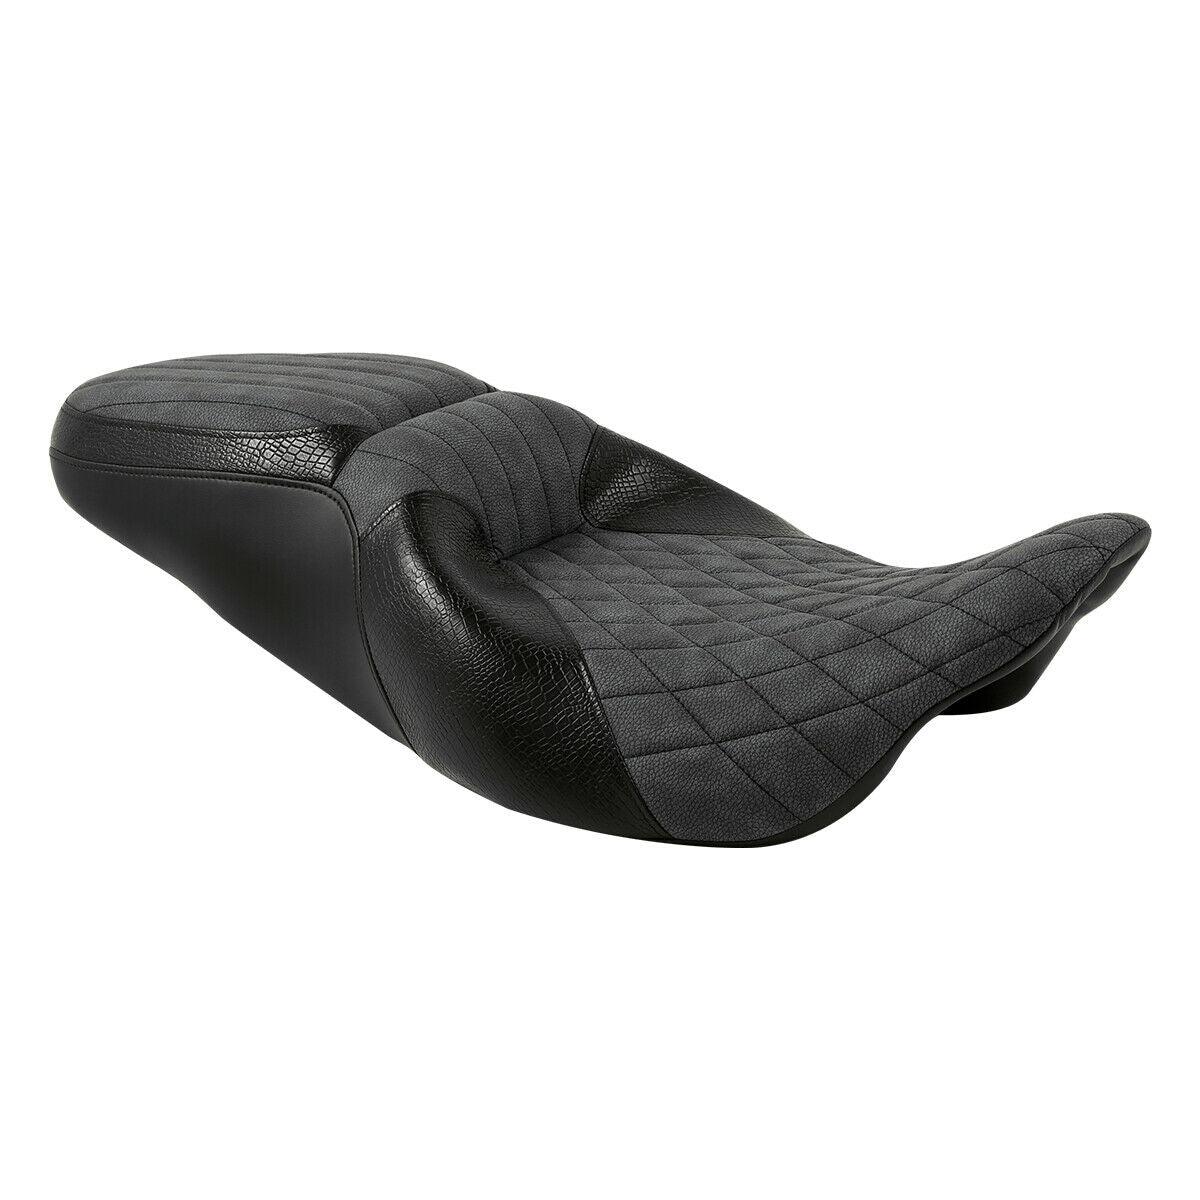 Driver Passenger Rear Seat Fit For Harley Touring Electra Glide Road Glide 09-20 - Moto Life Products